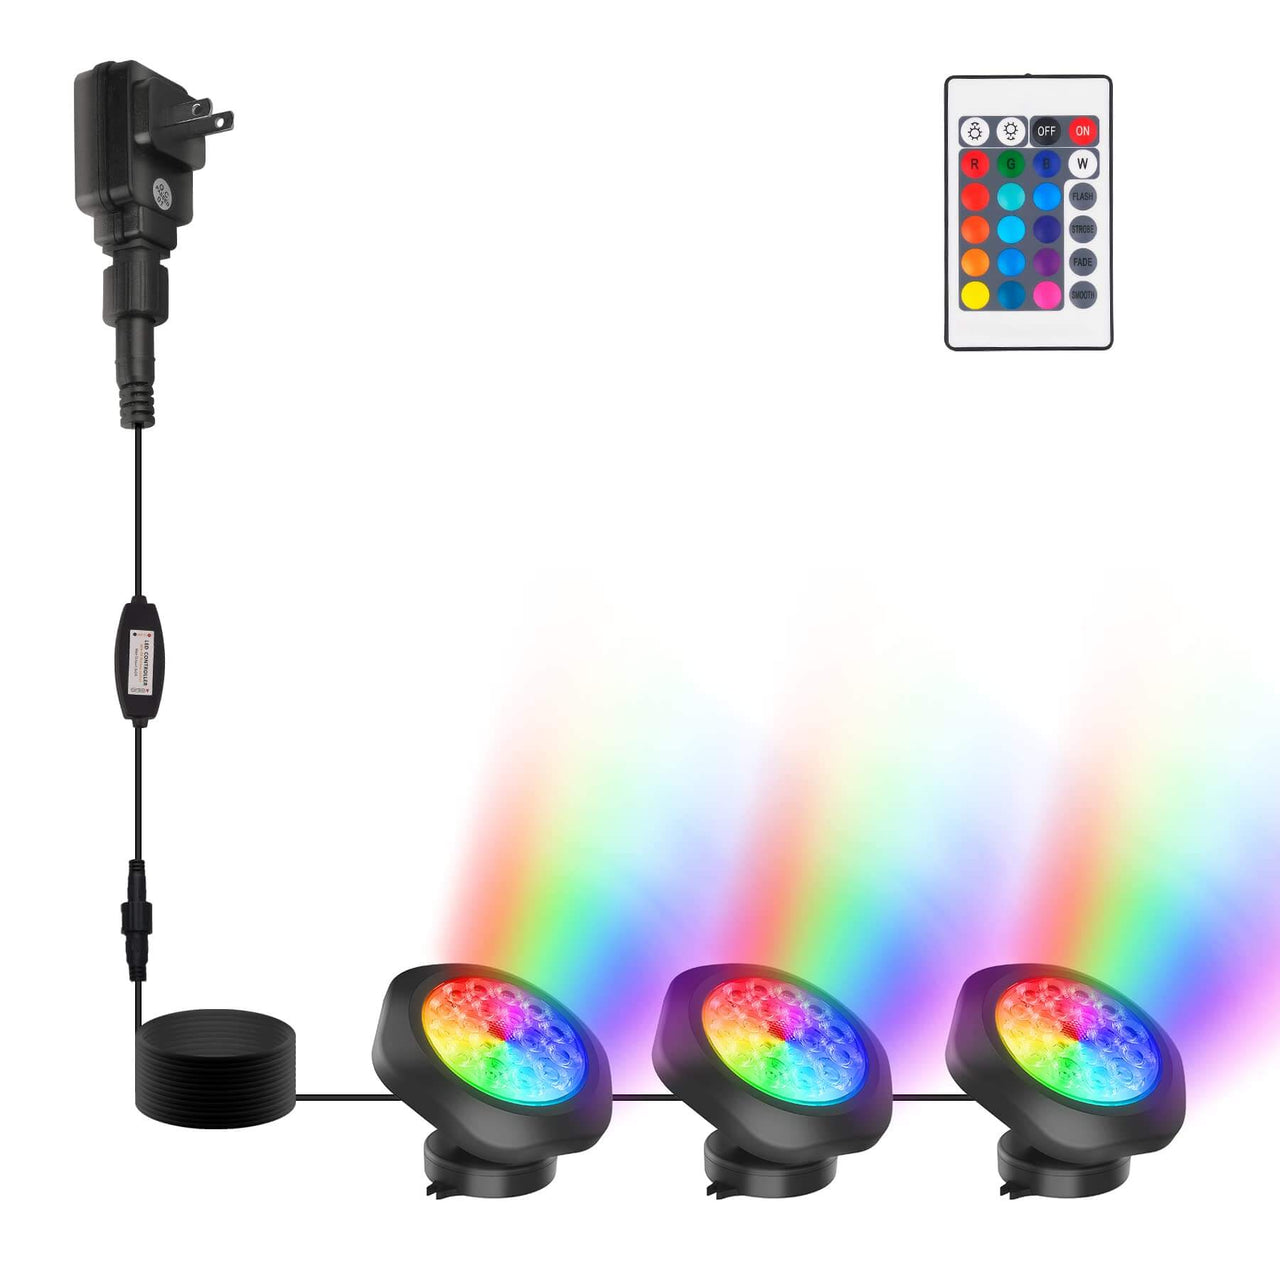 3 in 1 RGB LED Pond Lights Waterproof with RC